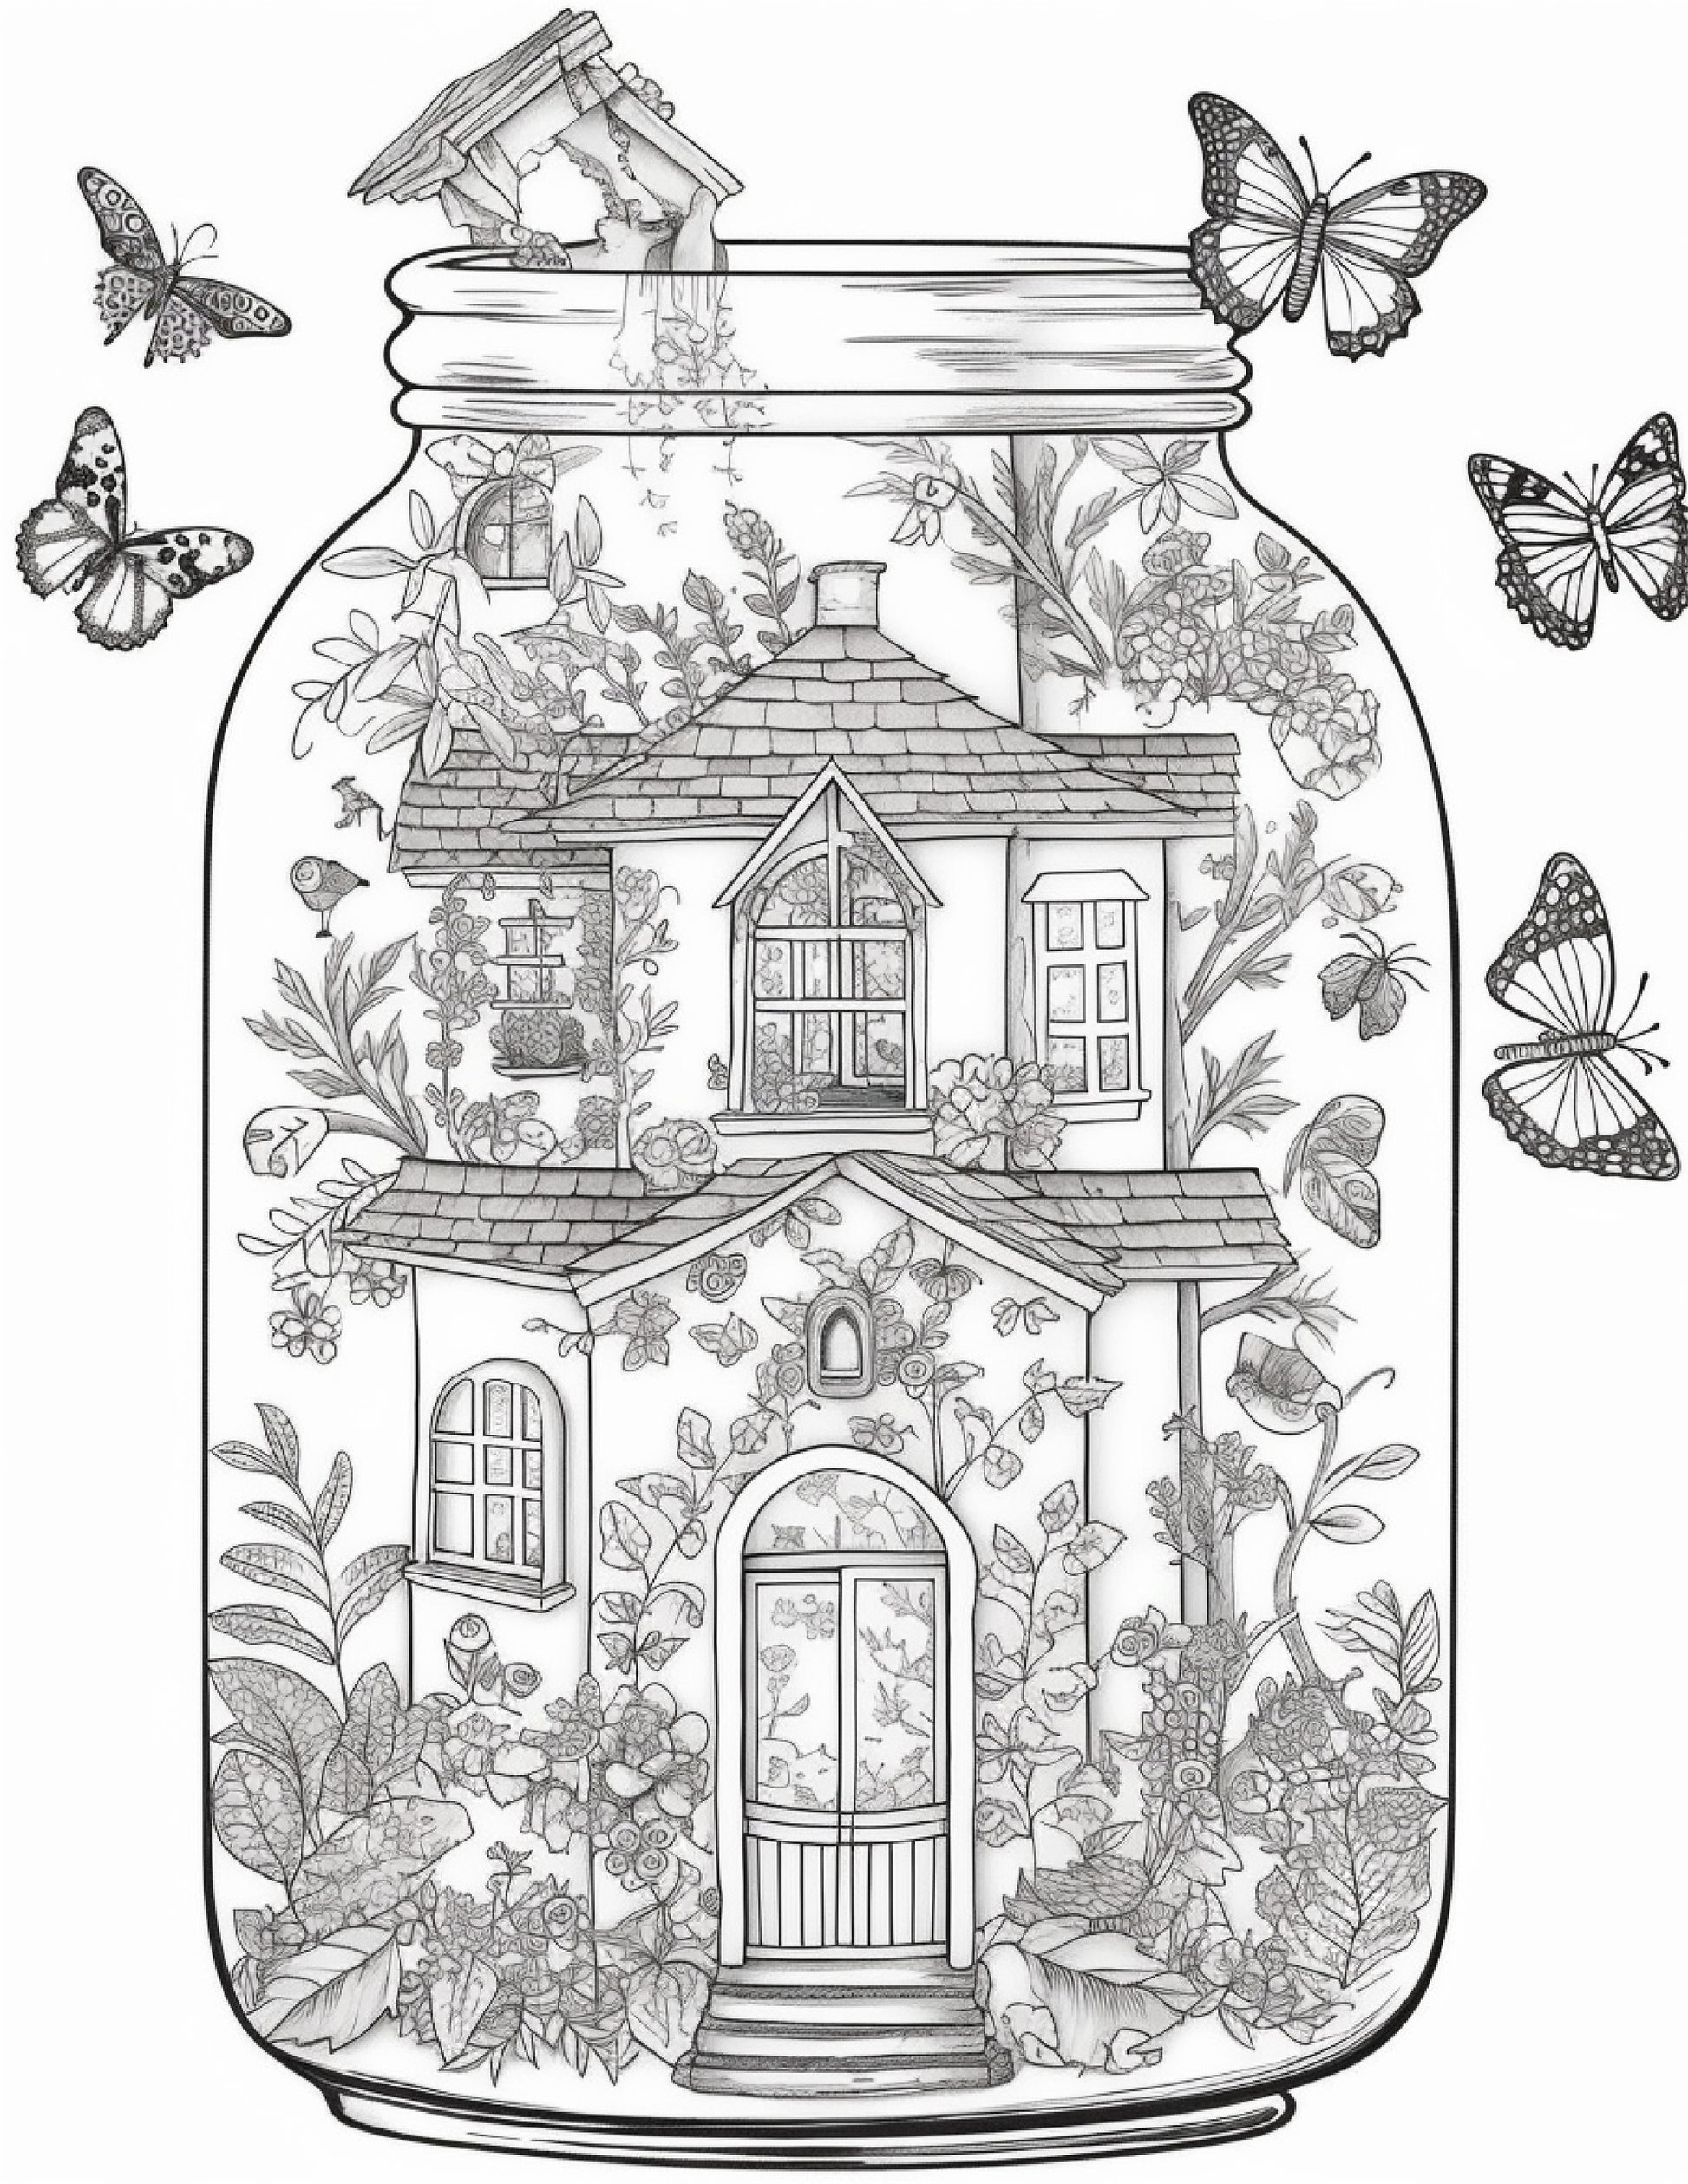 50 Printable Fairy Houses in Jar Coloring Pages for Adults, Grayscale  Coloring Book, Stress Relief Coloring Pages, Printable PDF Instant Download